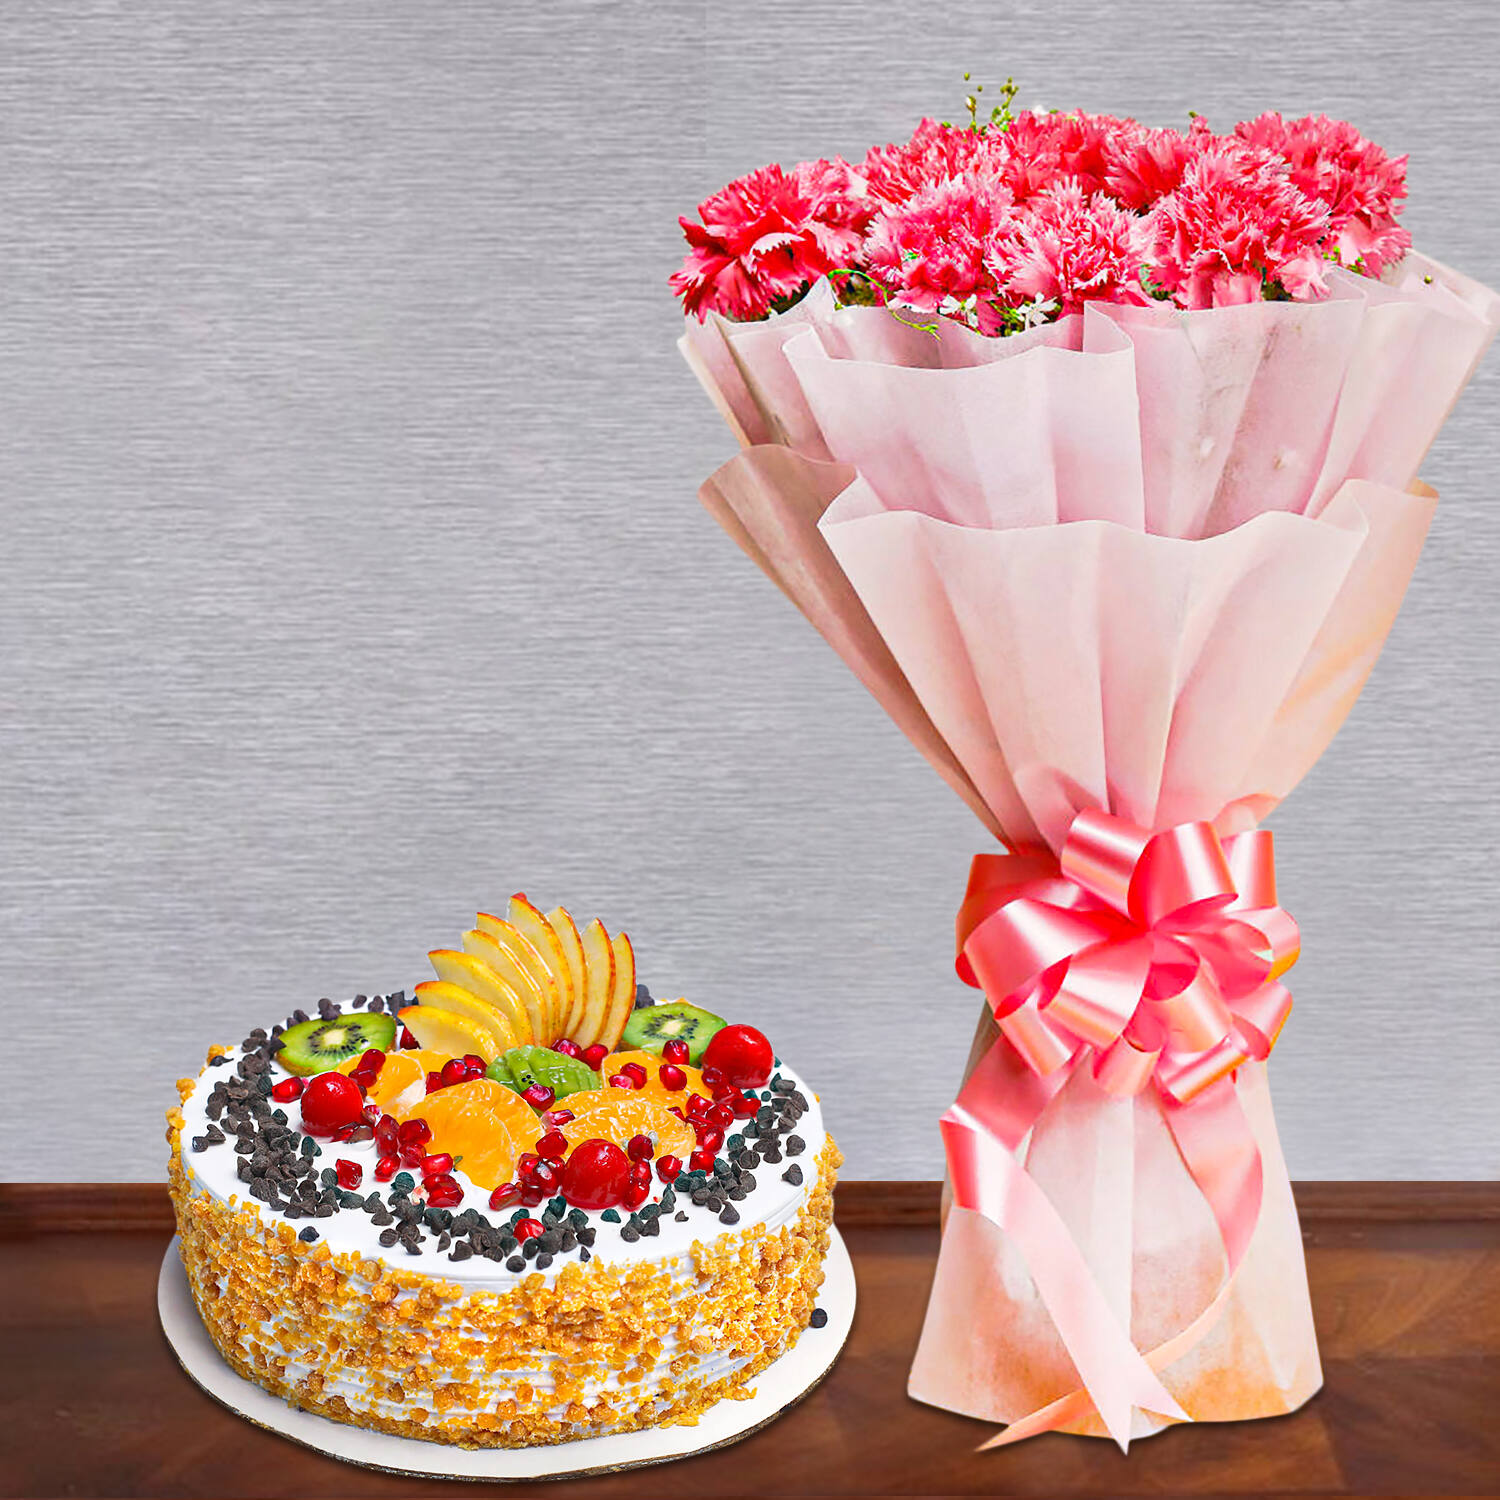 Joey Cakes - Chocolate Drip Cake & Roses Flower Bouquet 🎂💐😘  https://bit.ly/cake-flower-bundlea www.joeycakes.sg 🍰Exceptional service  🍰Halal certified 🍰Customisable designs 🍰Delivery Contact us for your  doorstep cake delivery! Hotline: 3157 3627 ...